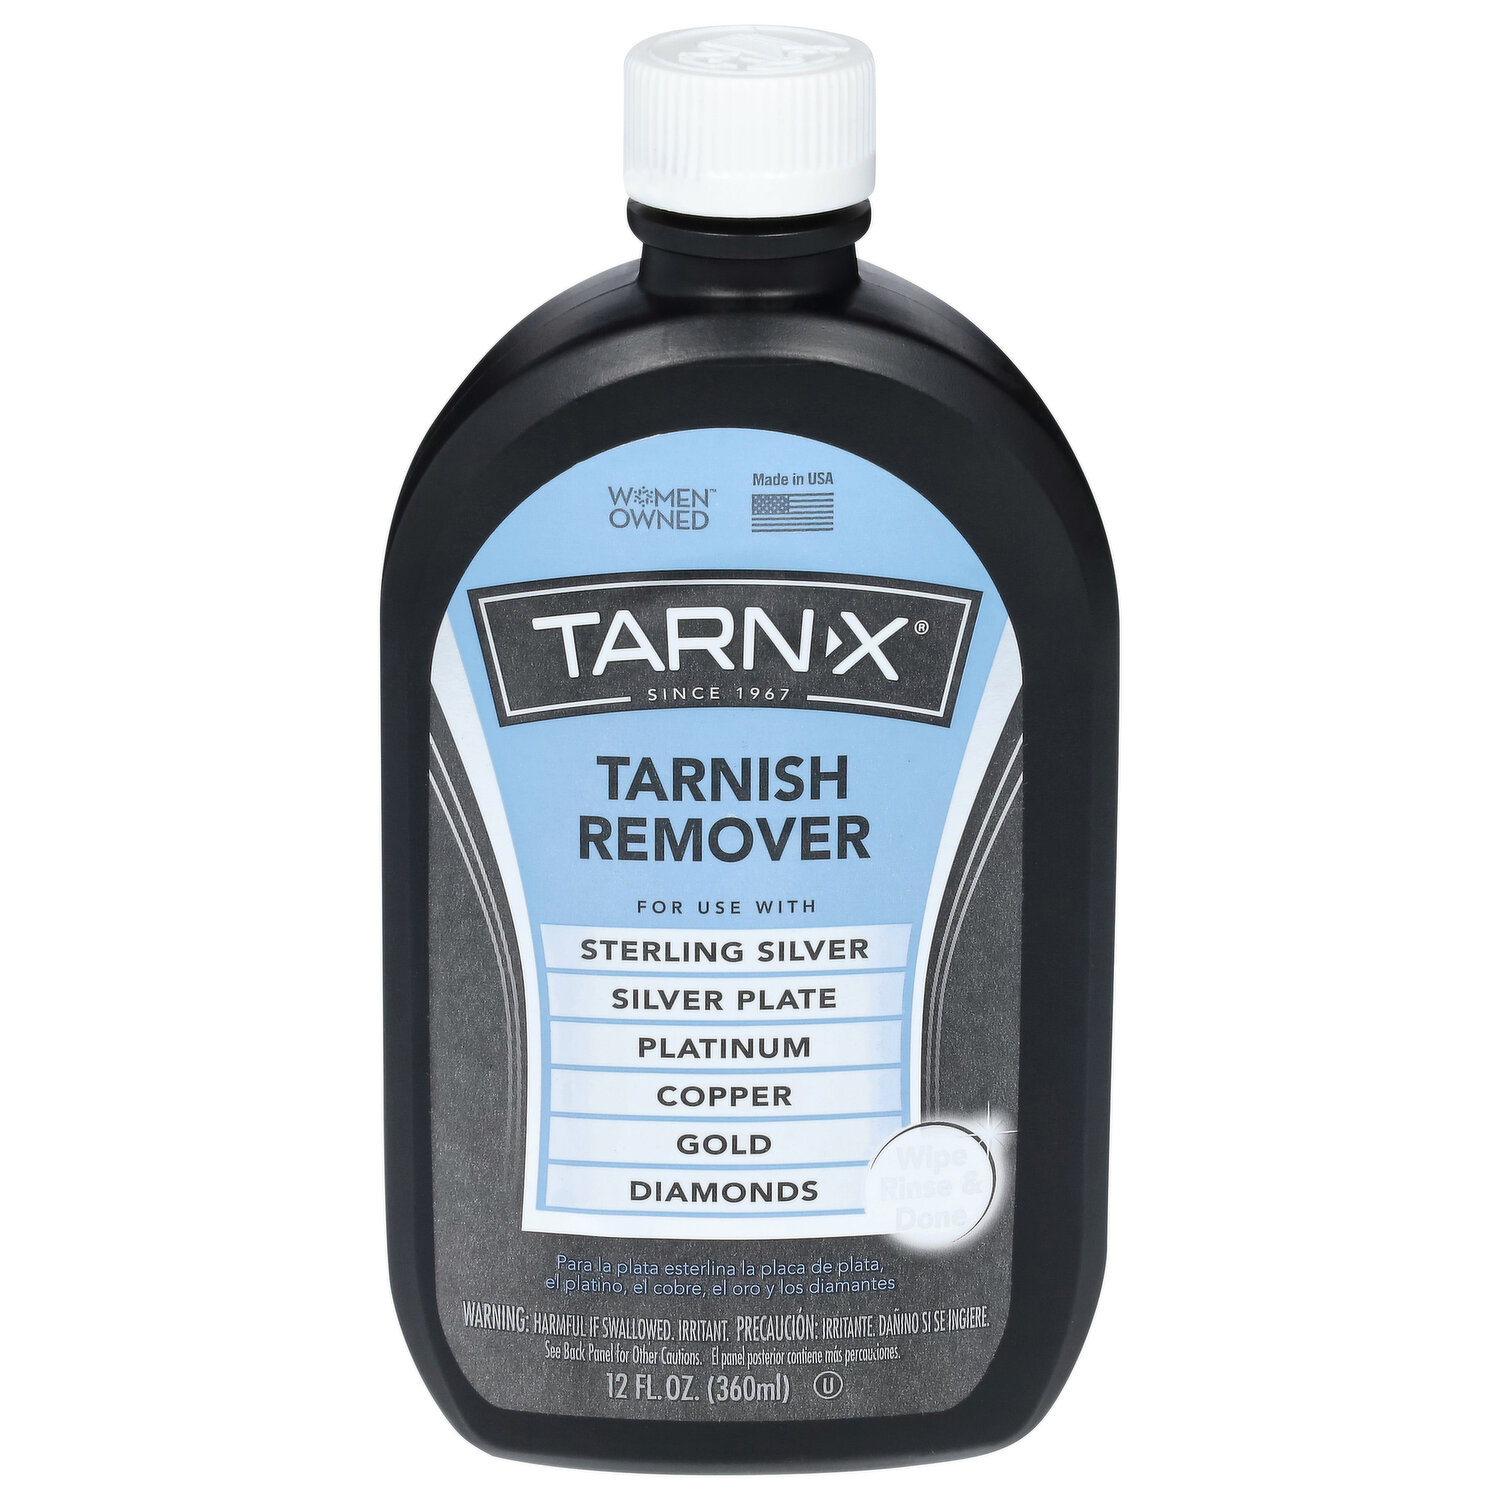  Tarn-X Metal and Silver Tarnish Remover, For Use on Sterling  Silver, Silver Plate, Platinum, Copper, Gold, Diamonds - 12 Ounce Bottle  (Pack of 2) : Health & Household